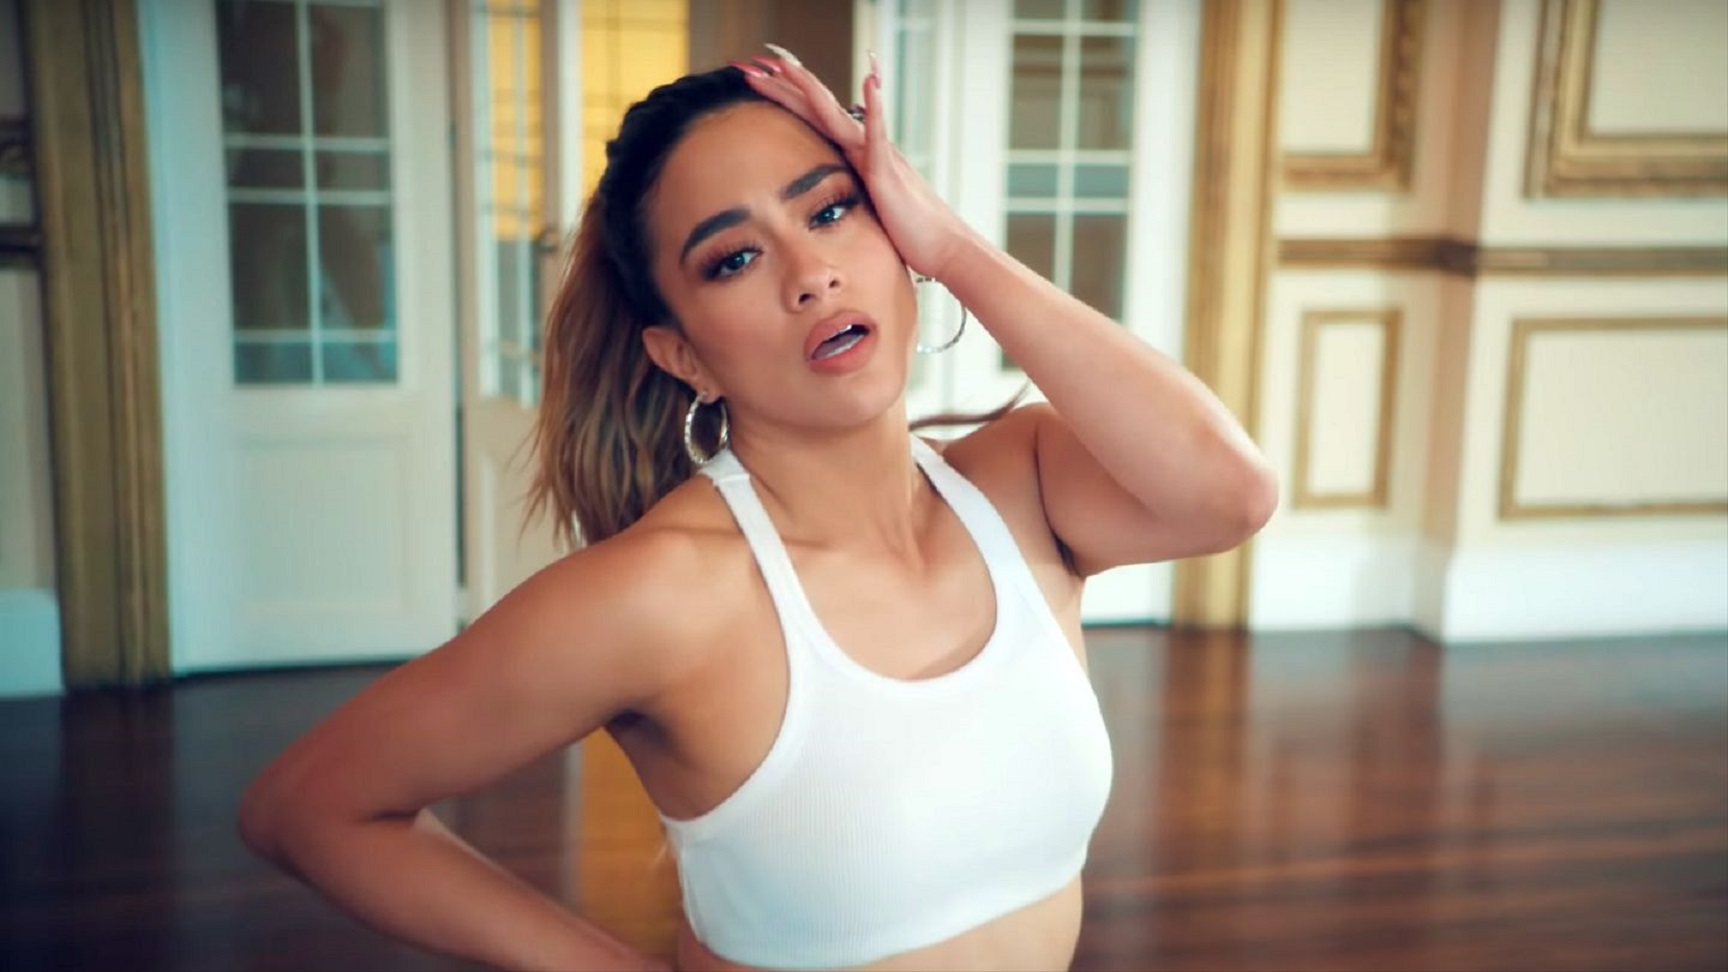 Fifth Harmony Singer Ally Brooke Proudly Reveals She’s a Virgin at 27, Is Saving Herself For Marriage